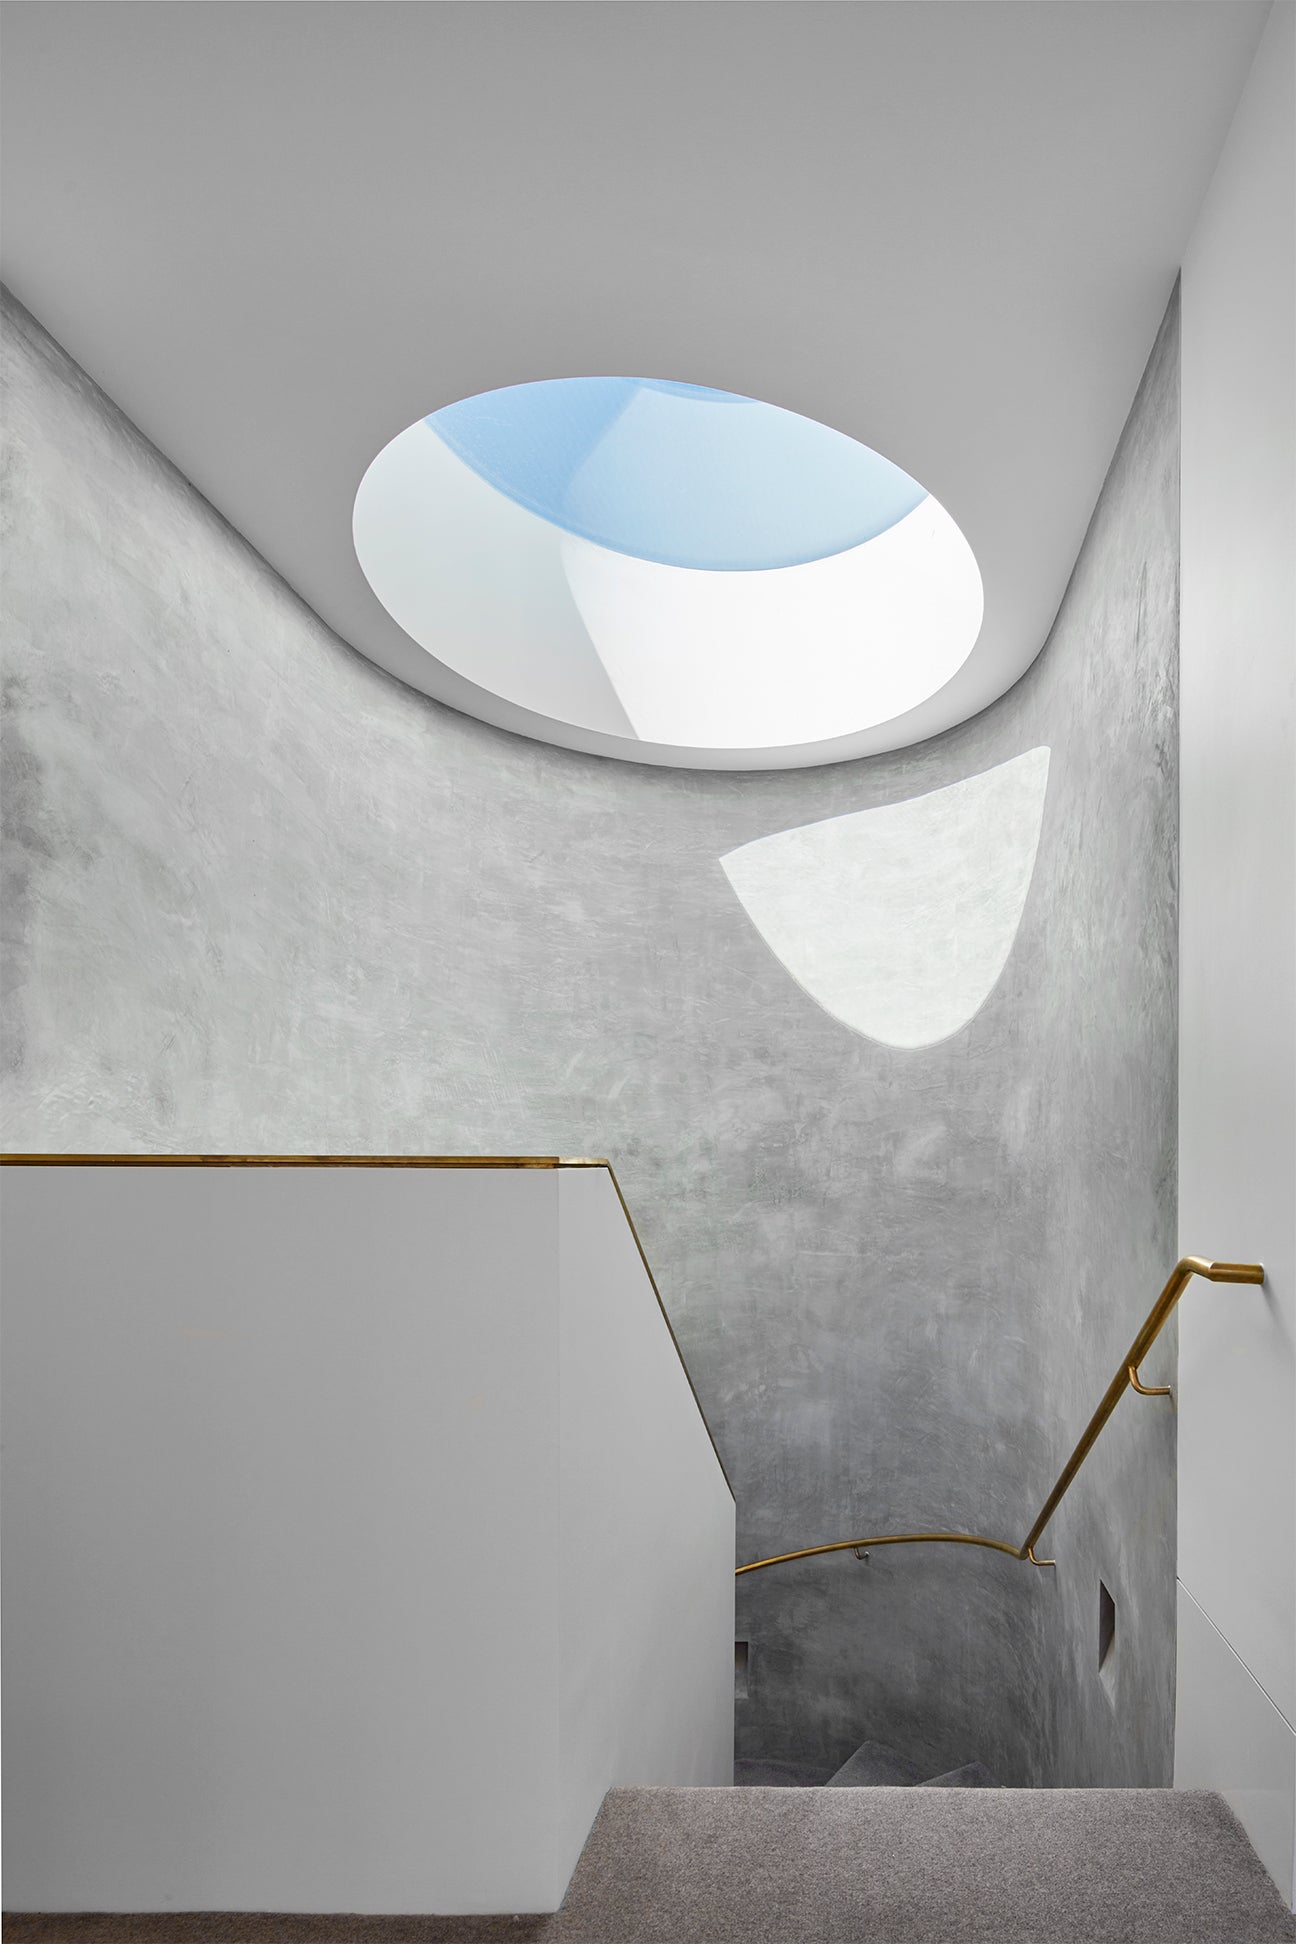 Staircase with round skylight